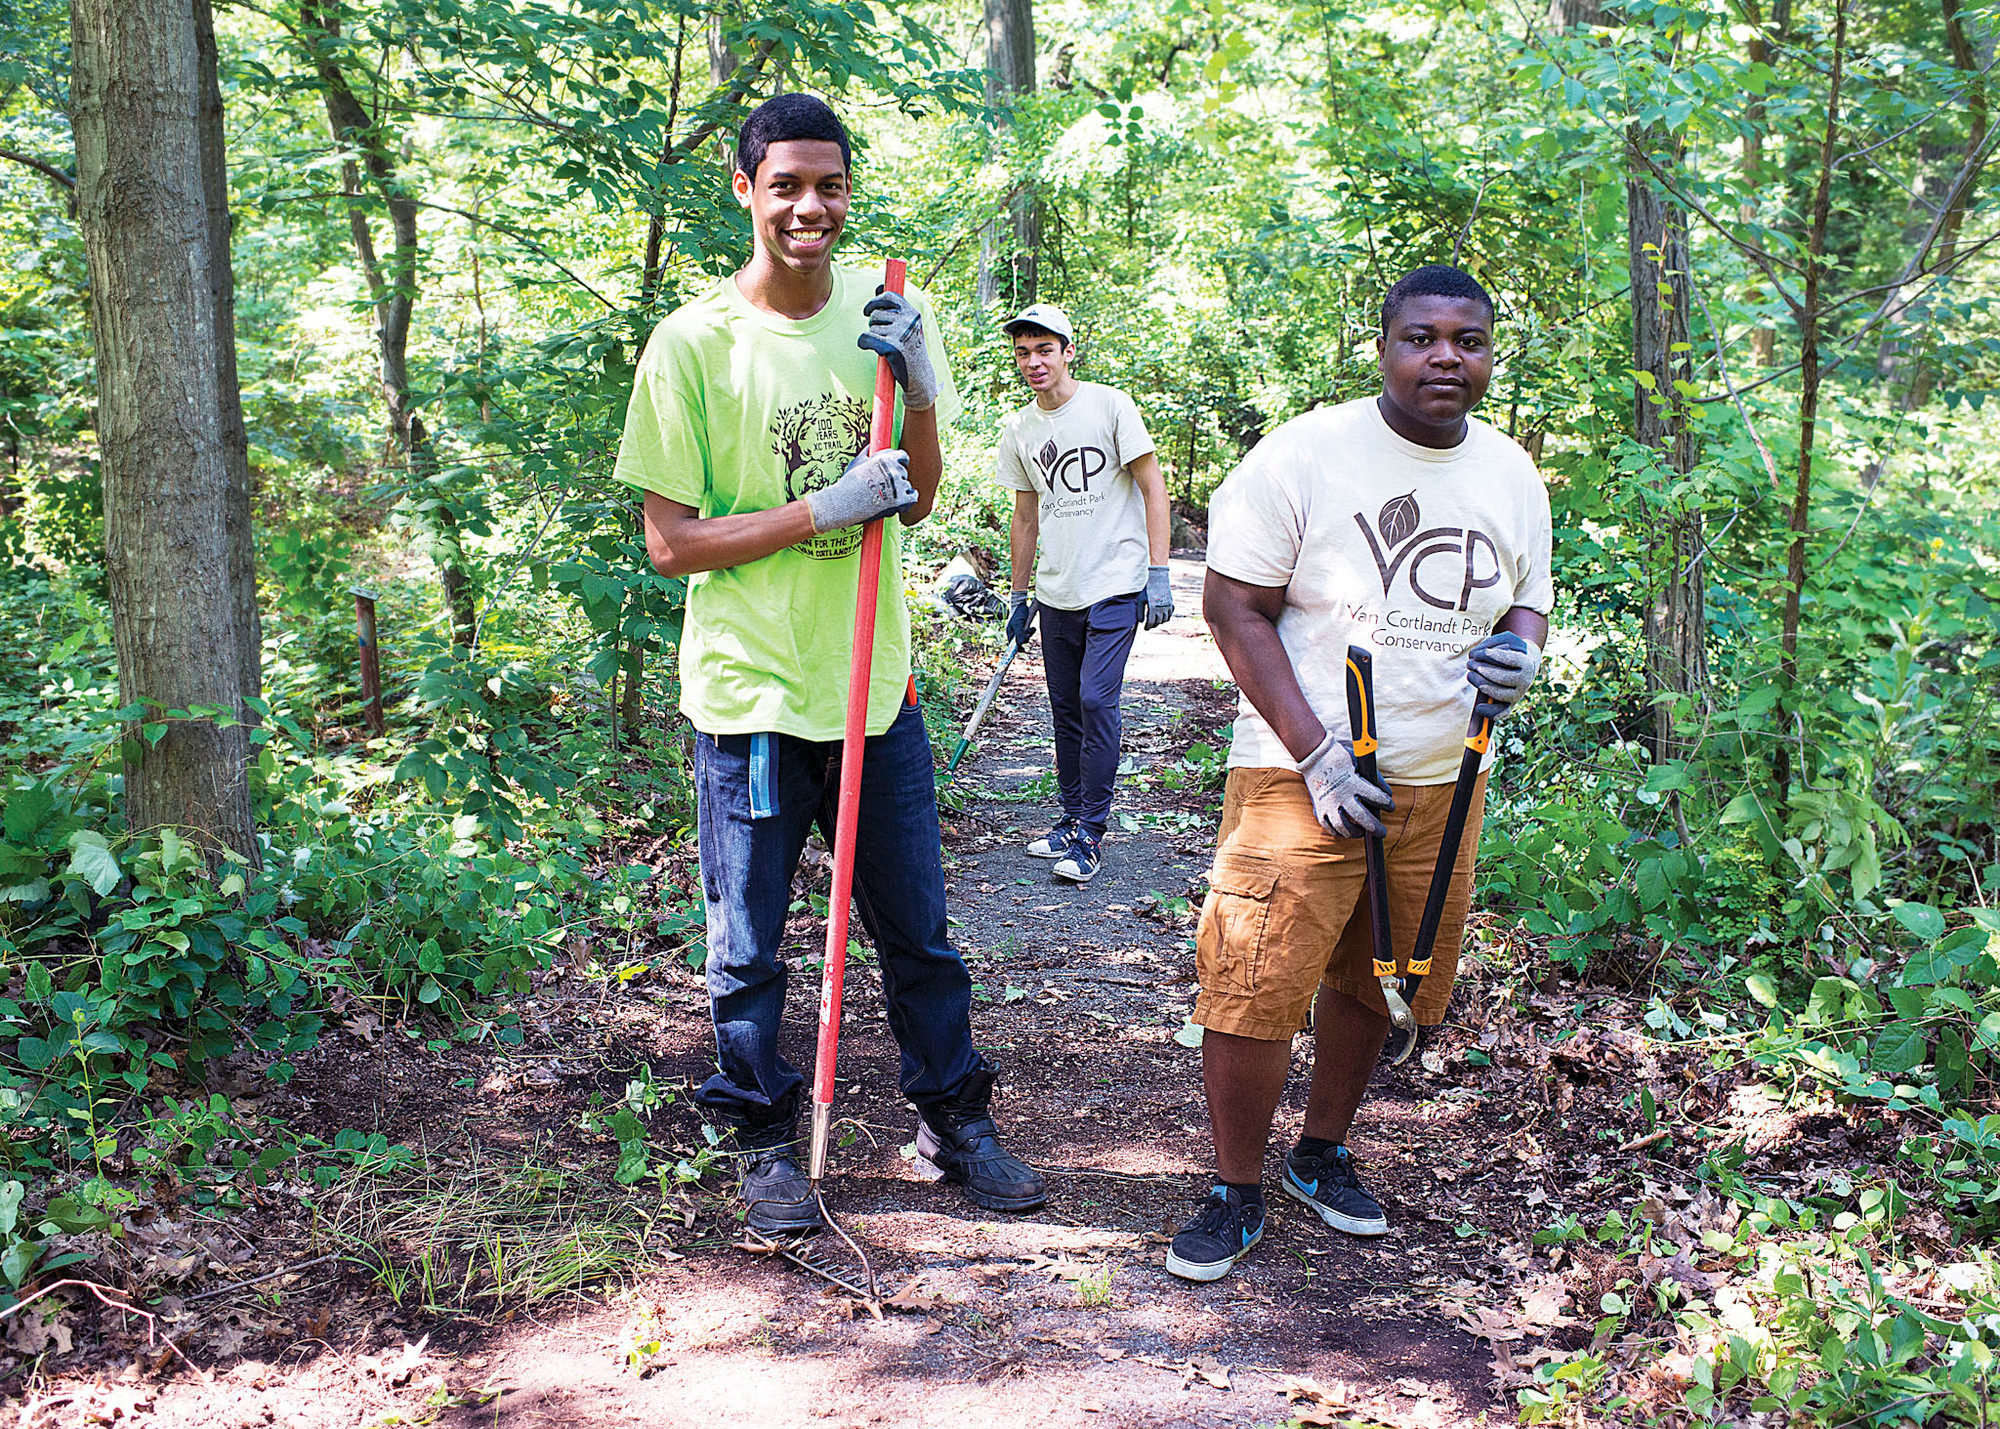 Steven Francis, Marcus Anderson, and Curtis Antiwi pose for a photo together as they clear overgrown trails in Van Cortlandt Park on July 16.